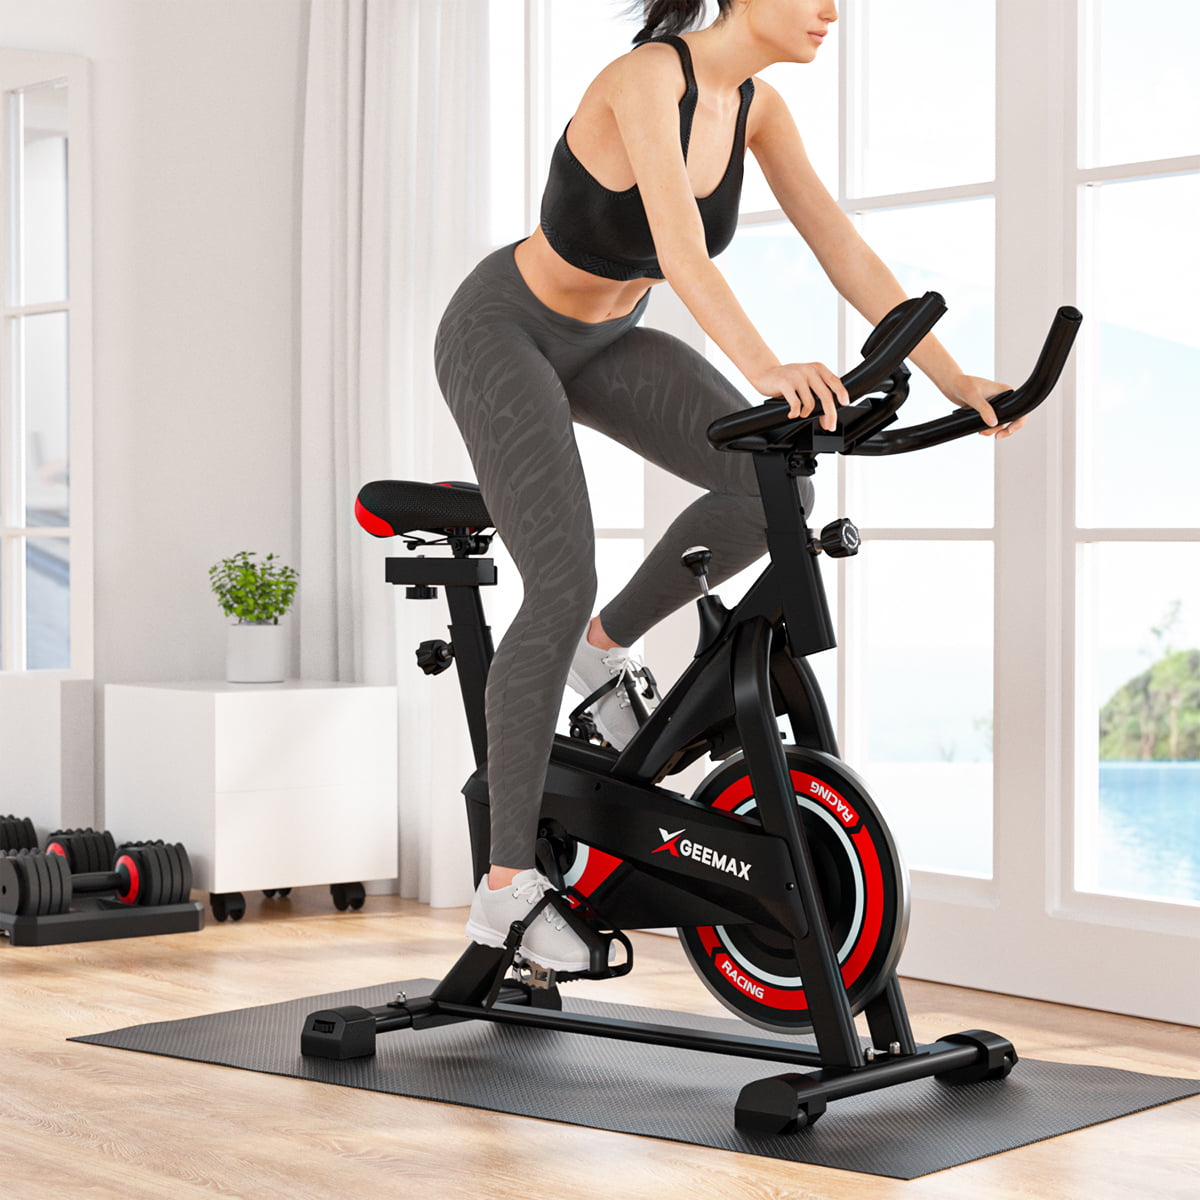 Bicycle Cycling Fitness Gym Exercise Stationary Bike Cardio Workout Indoor Black 